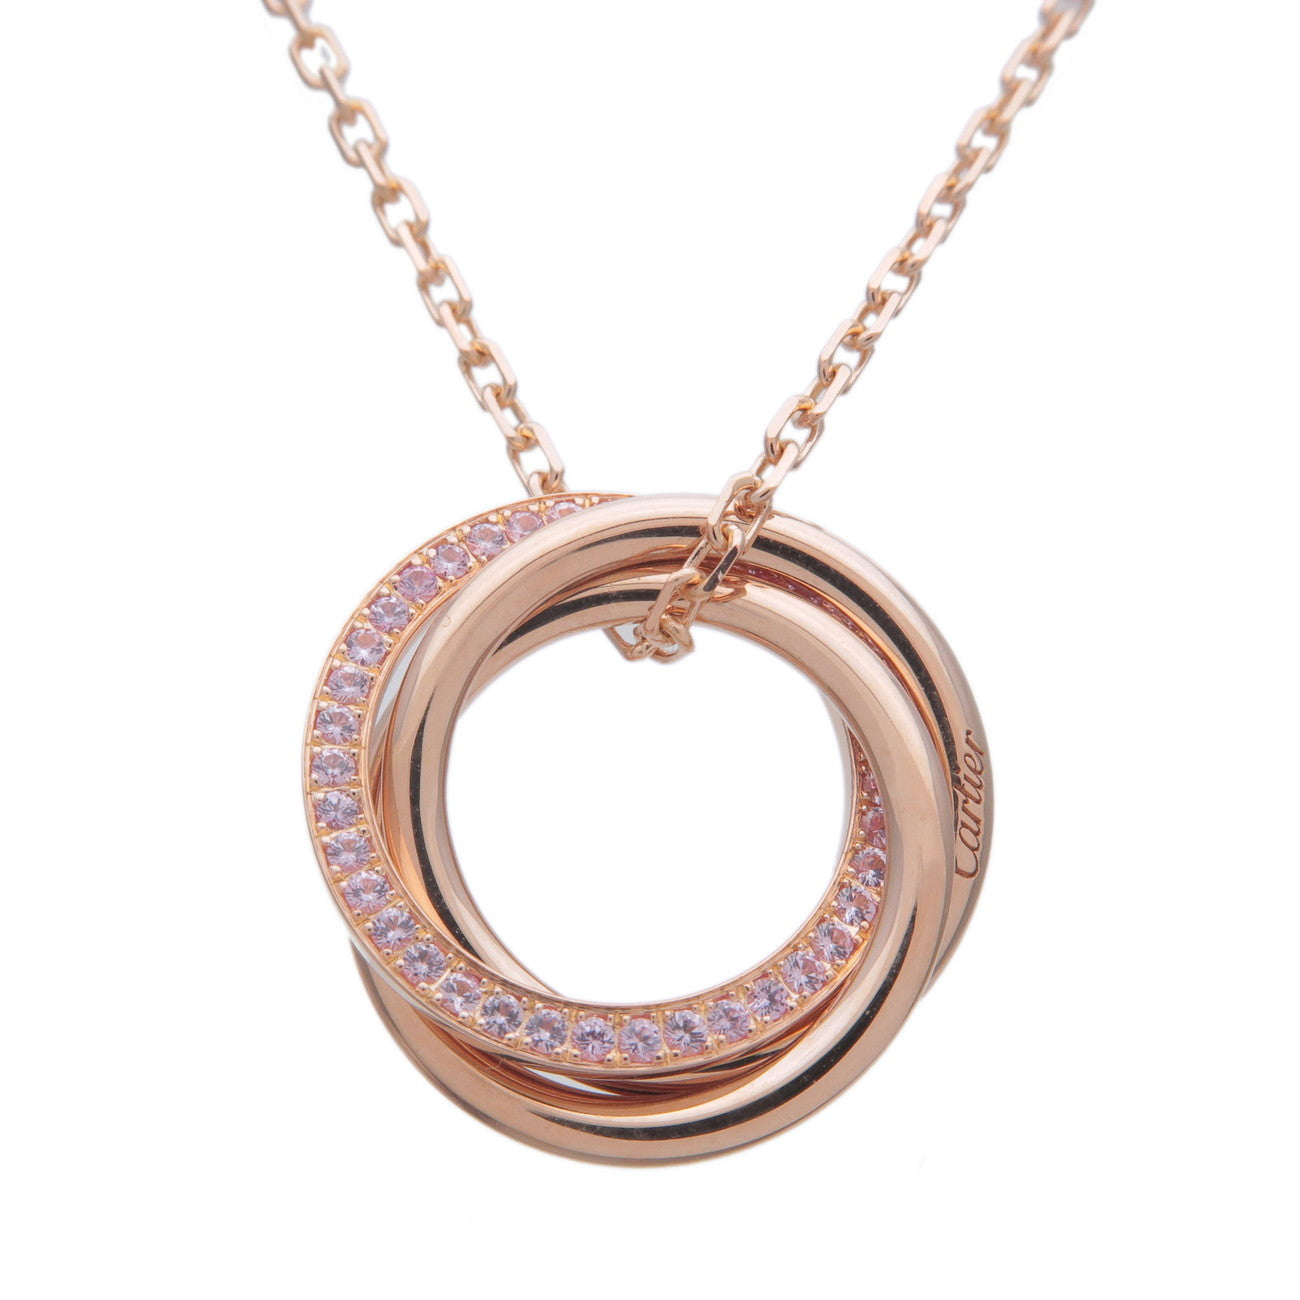 Cartier-Trinity-Pink-Sapphire-Necklace-K18-750PG-Rose-Gold